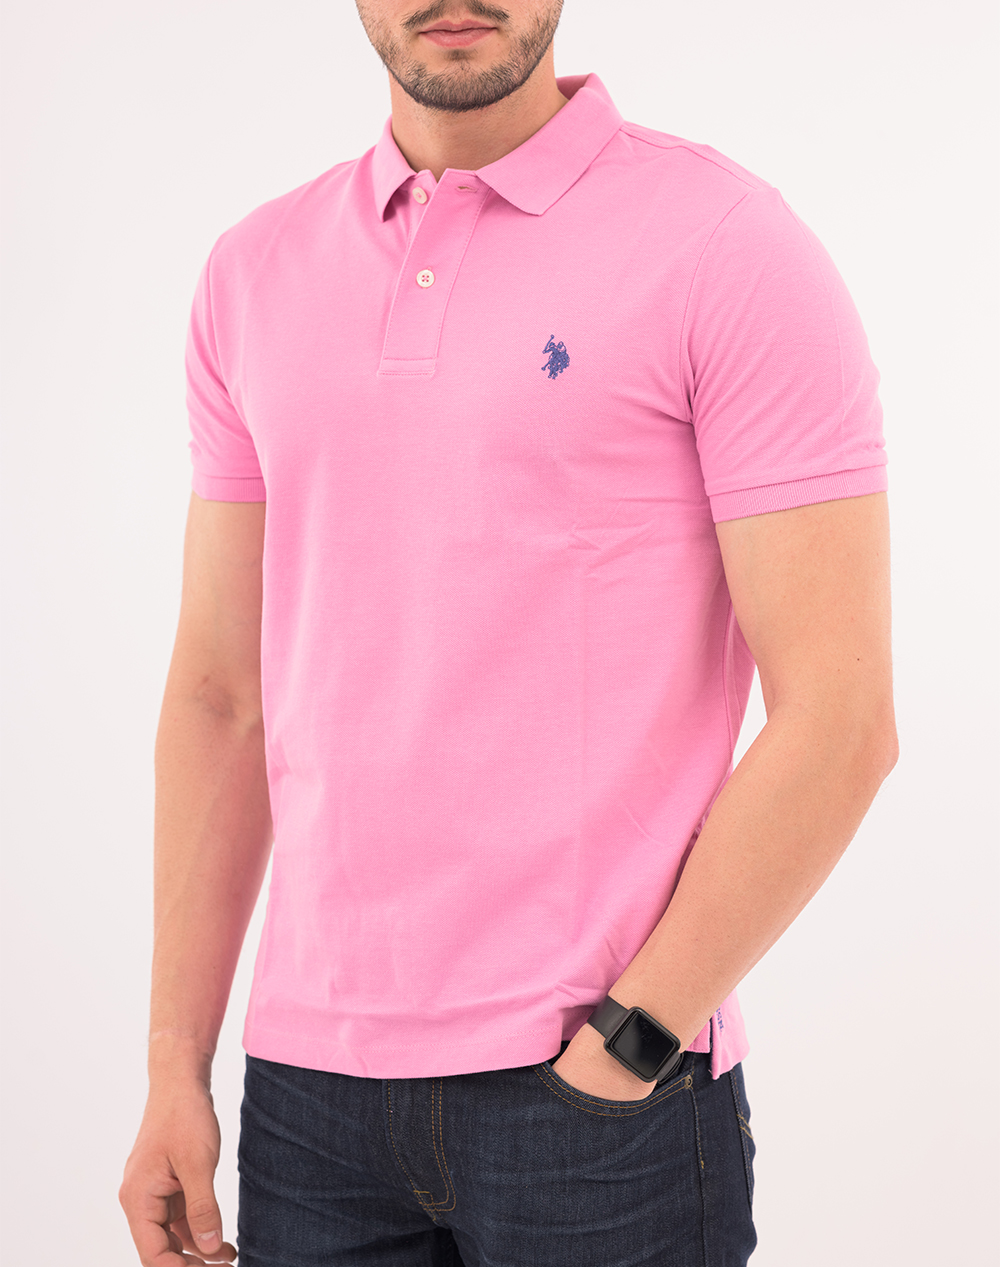 US POLO ASSN KING 41029 EHPD POLO PACK OF 400 ΜΠΛΟΥΖΑ ΑΝΔΡΙΚΟ 6735541029P400-305 Pink 3820A0USP3400003_XR29000